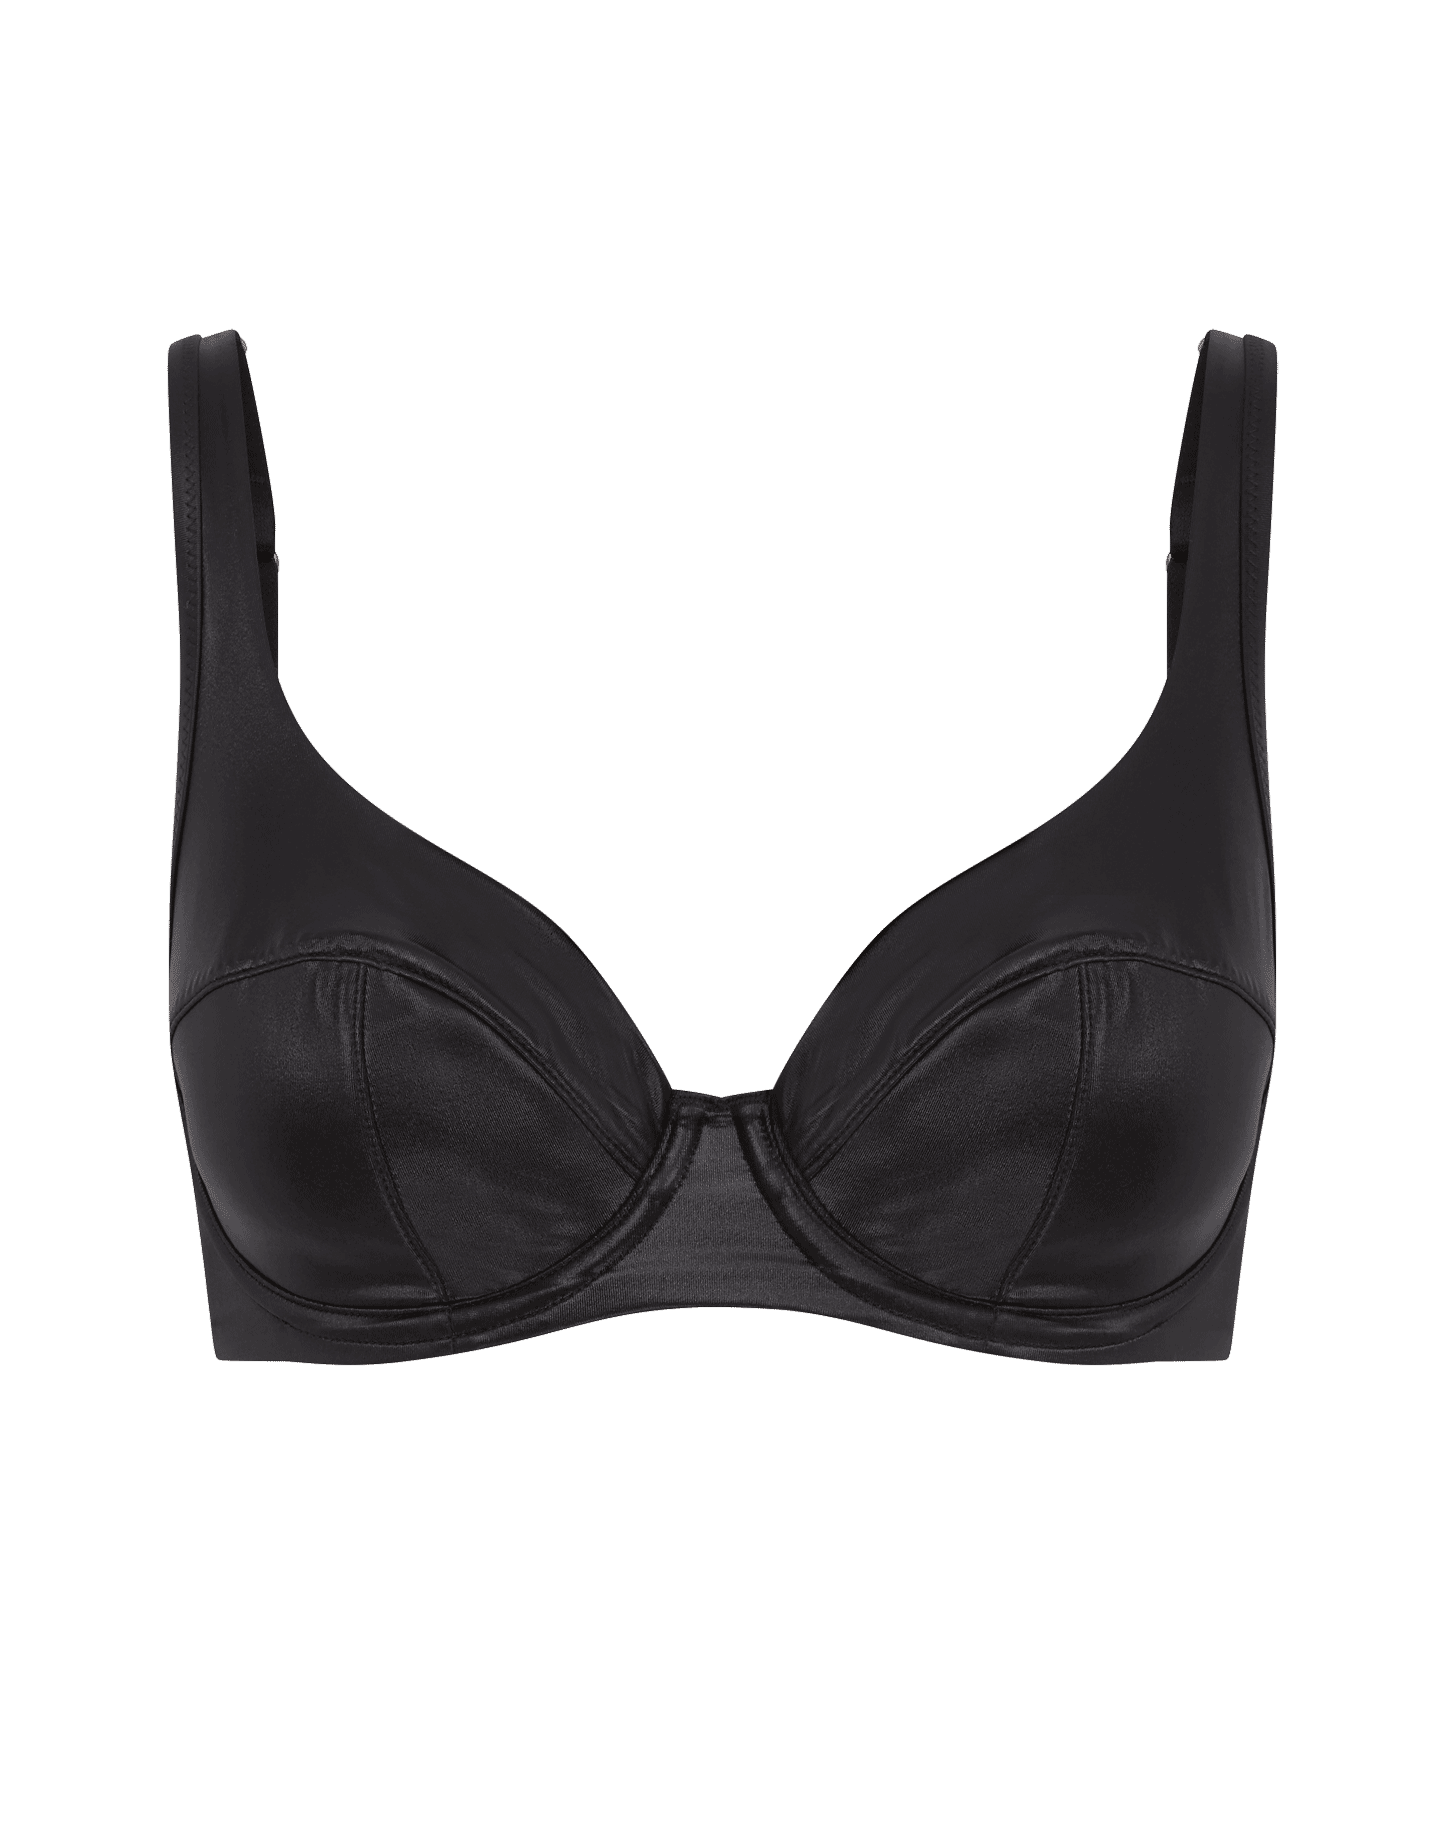 Paige Full Cup Underwired Bra